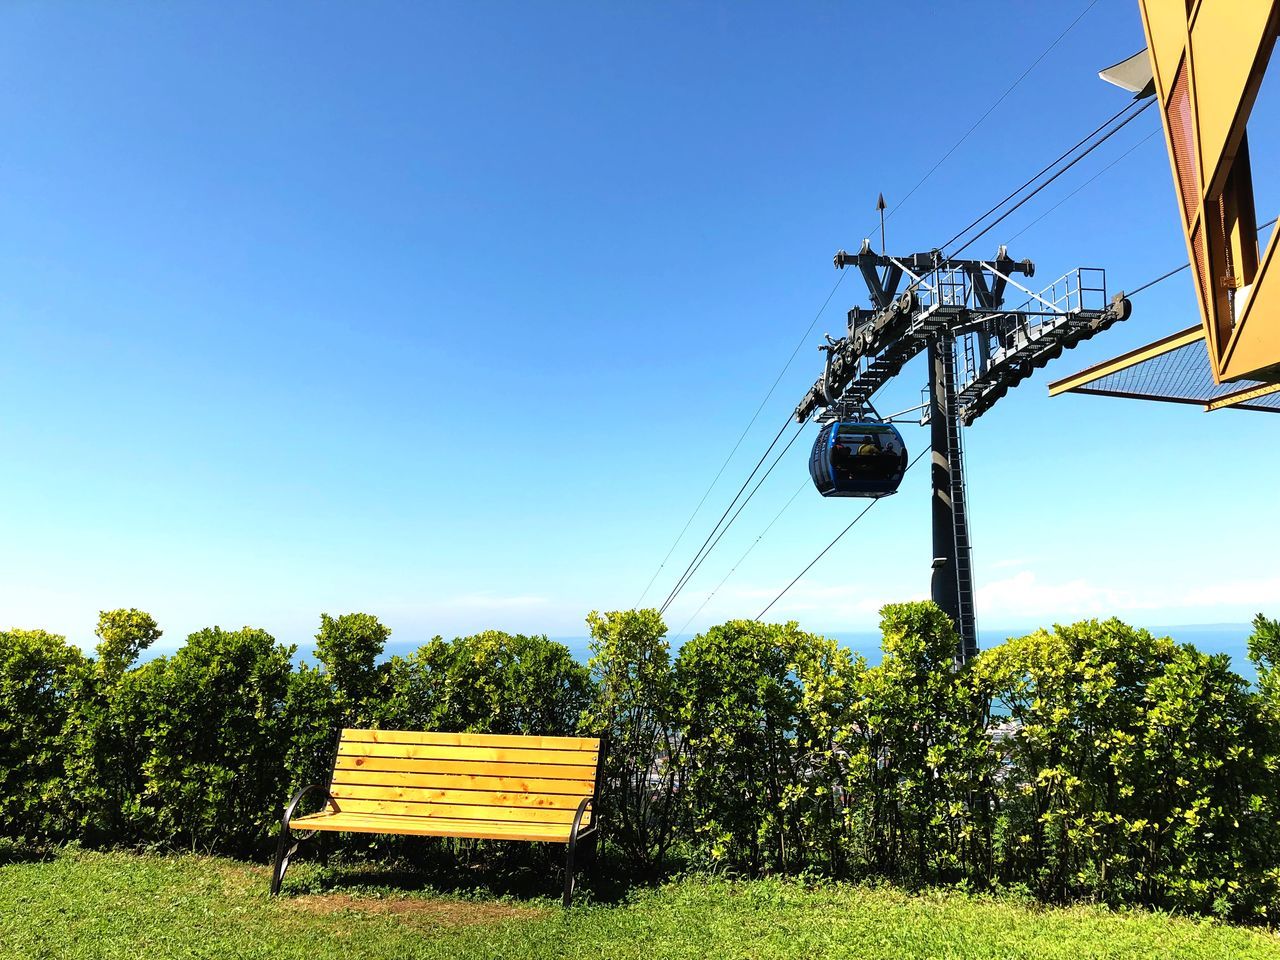 sky, plant, nature, clear sky, tree, day, field, no people, copy space, land, growth, sunlight, landscape, technology, blue, cable, outdoors, connection, fuel and power generation, grass, electricity, power supply